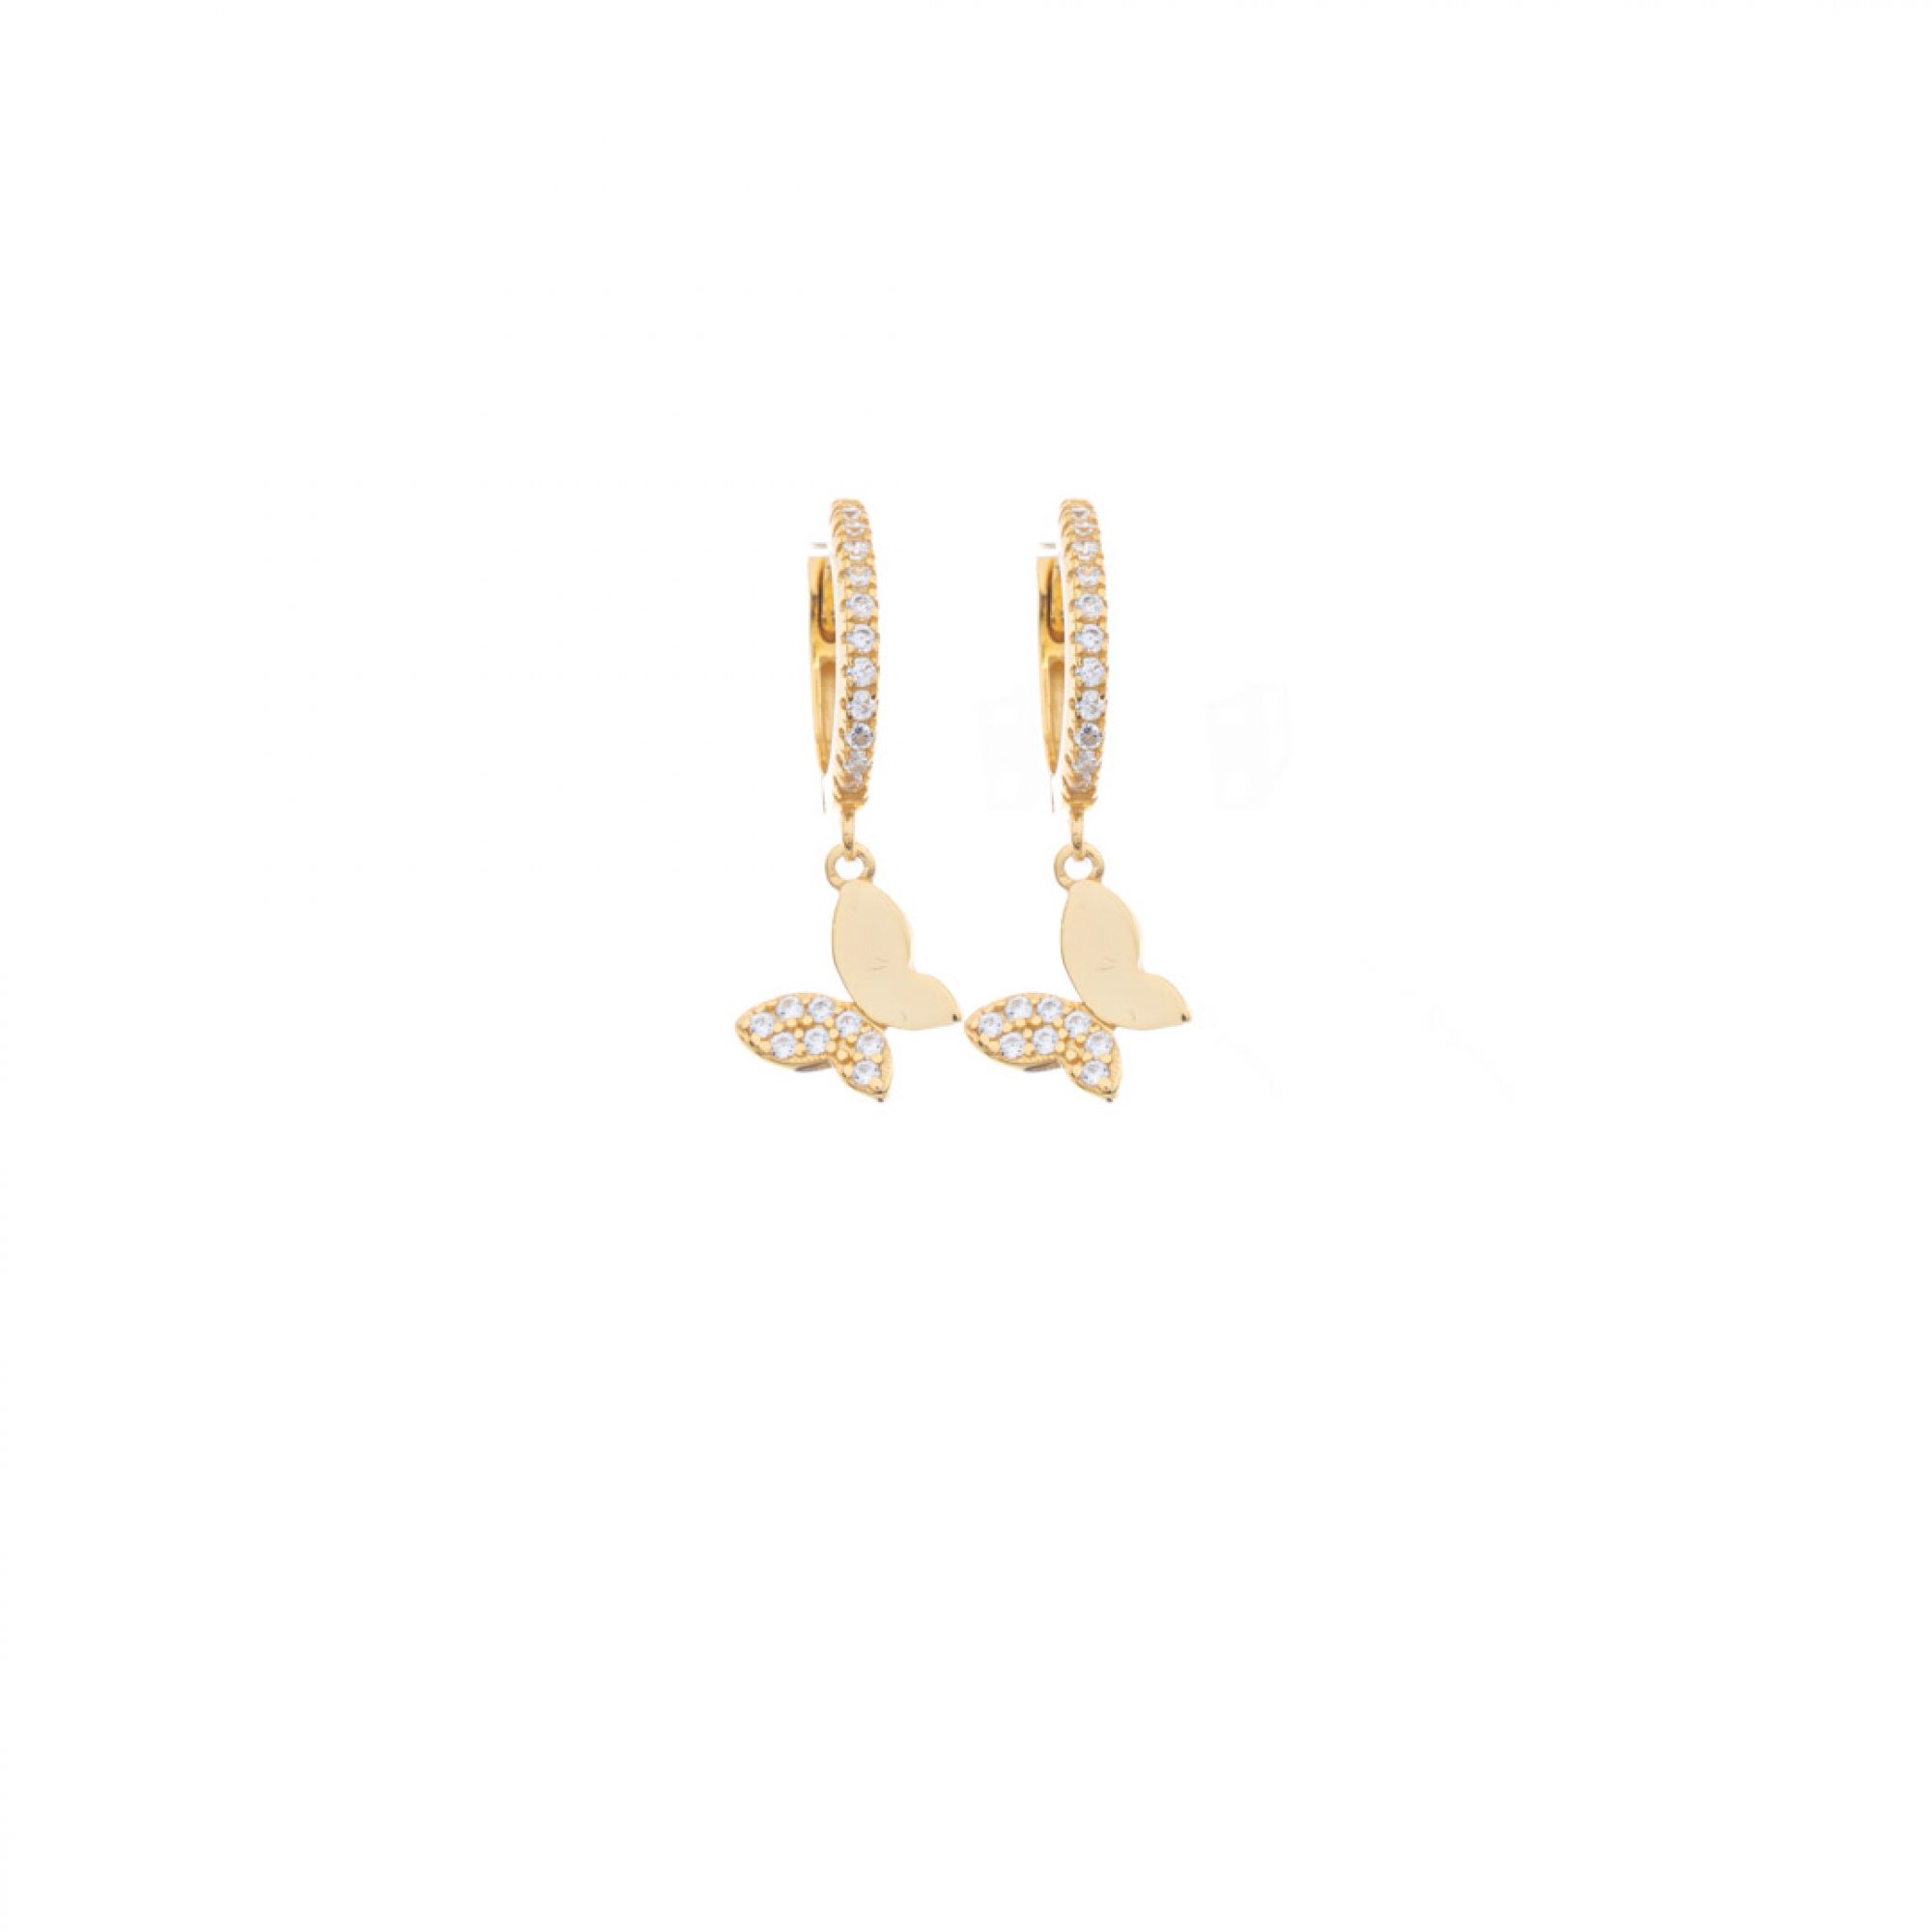 Gold plated earrings with zircon stones